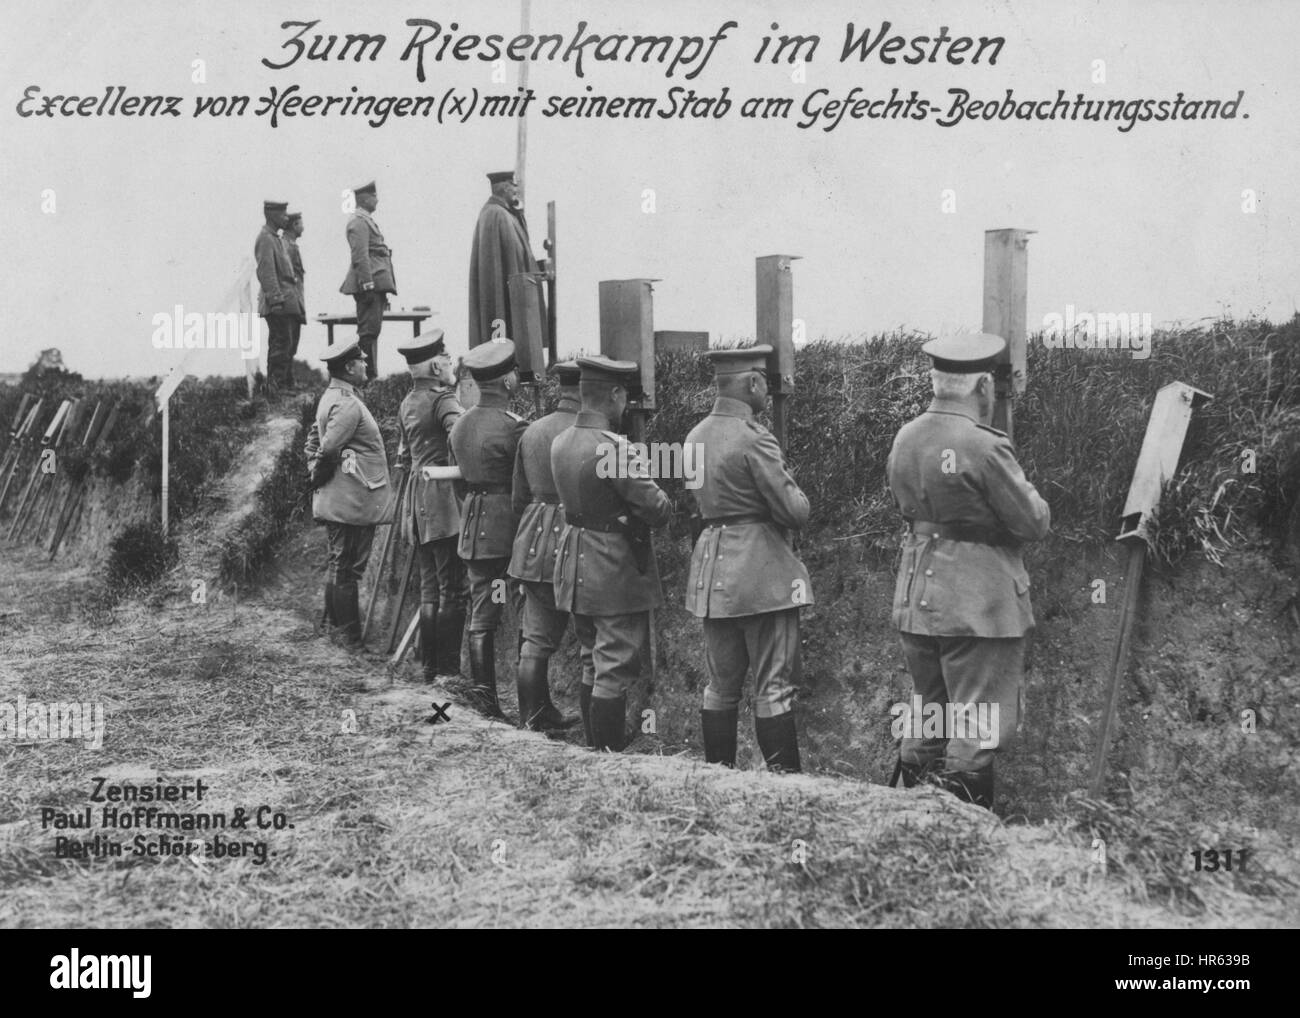 German general Josias von Heeringen and his army during World War I, 1914. From the New York Public Library. Stock Photo